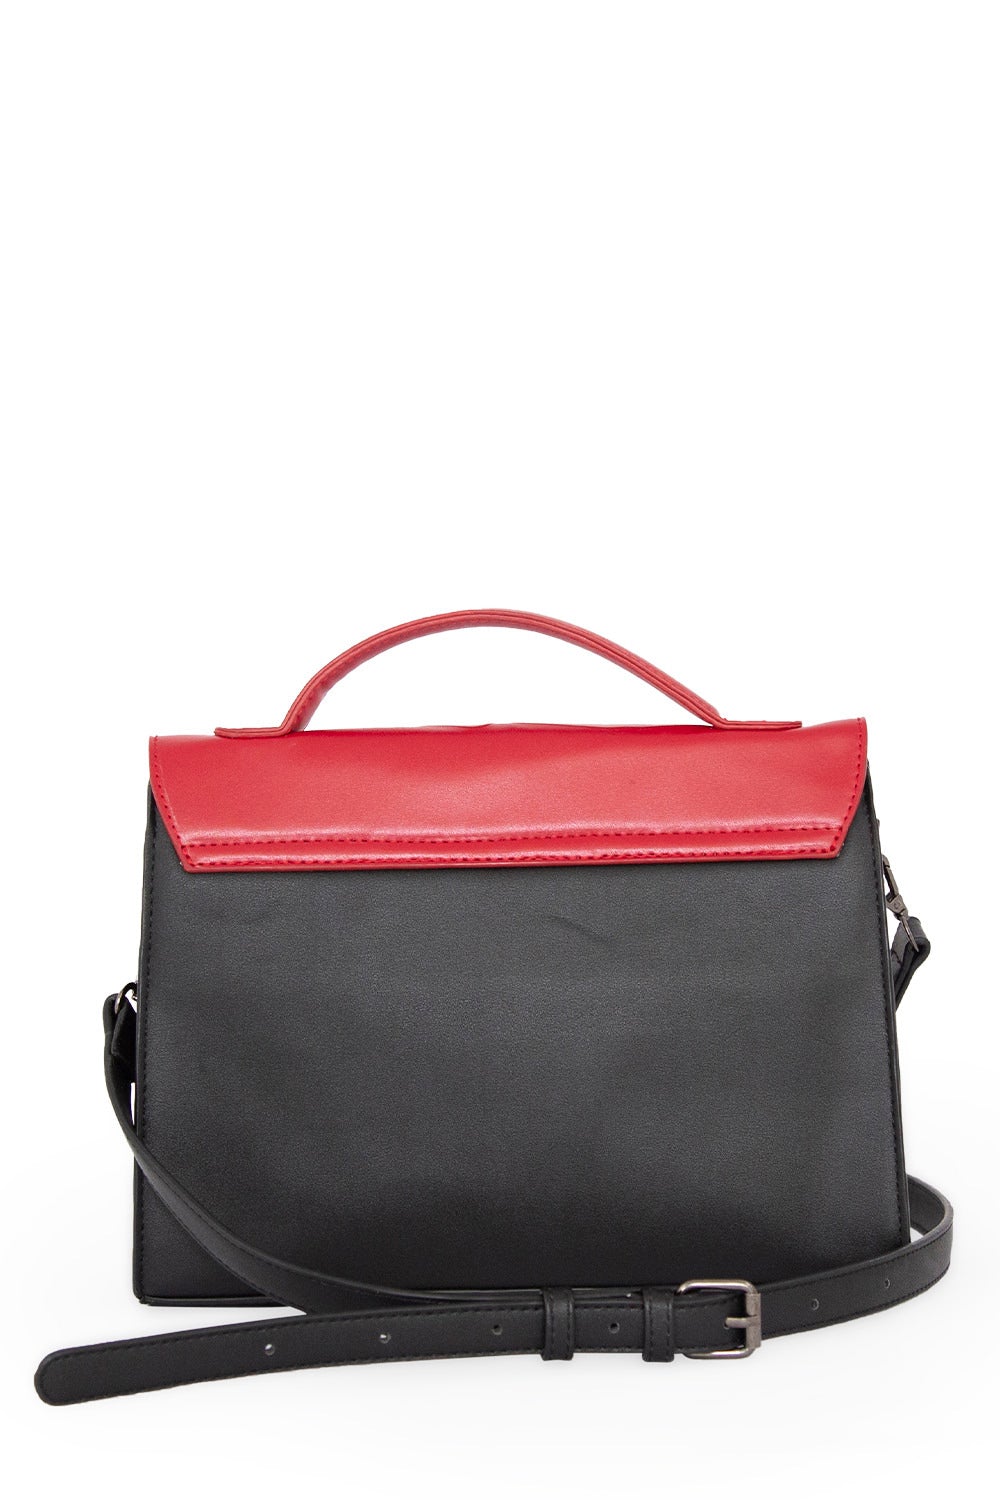 Black handbag with red skull cut out flap with handle strap and long adjustable strap